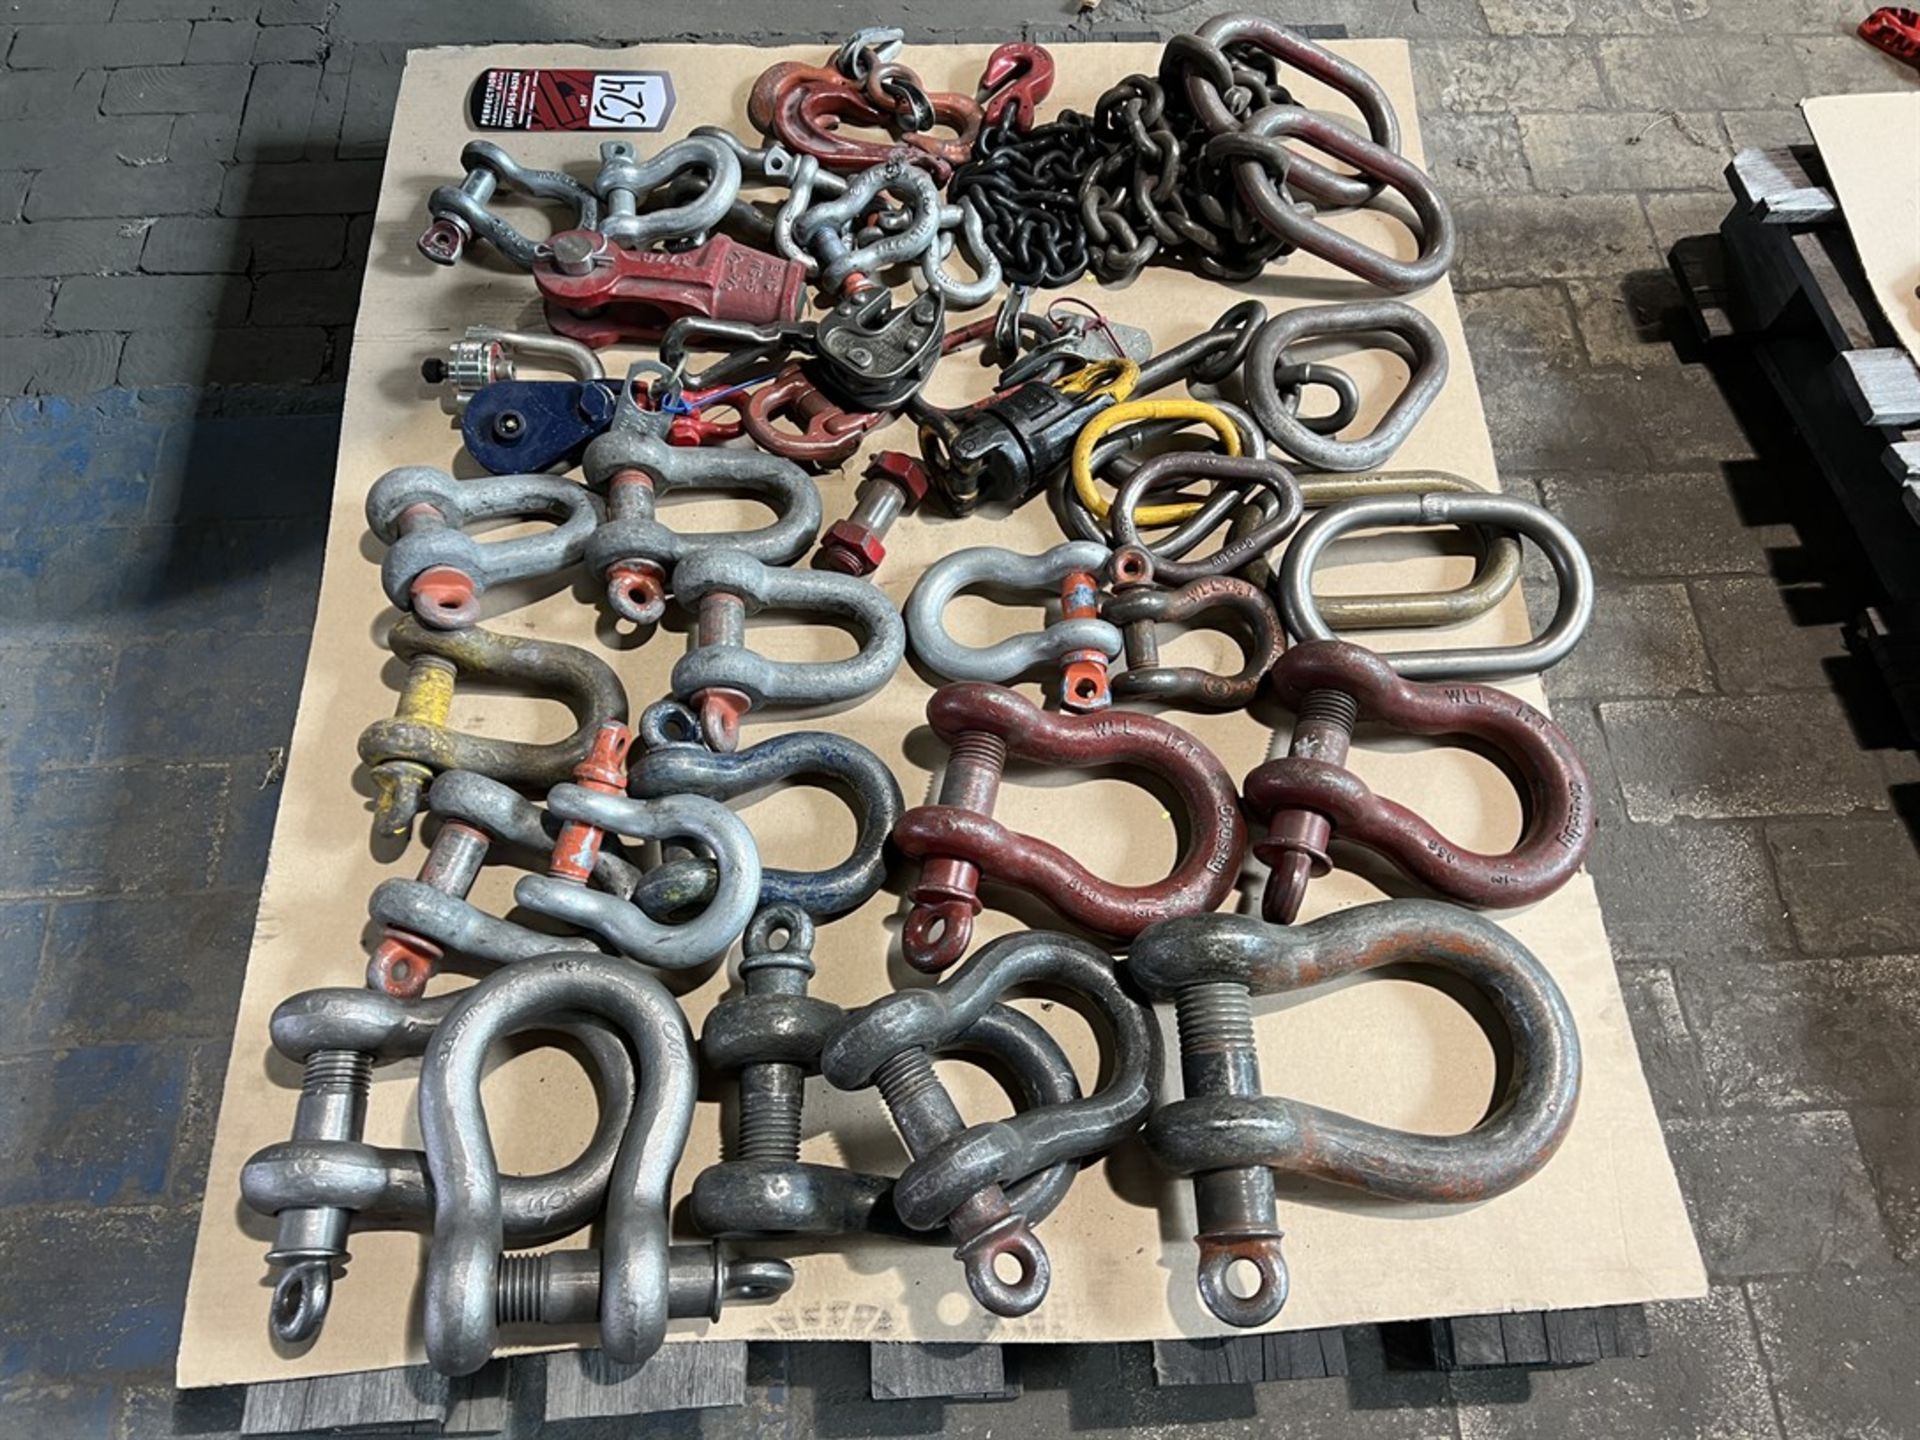 Pallet of Hoist Rings, Plate Lifter and Shackles (Building 44)